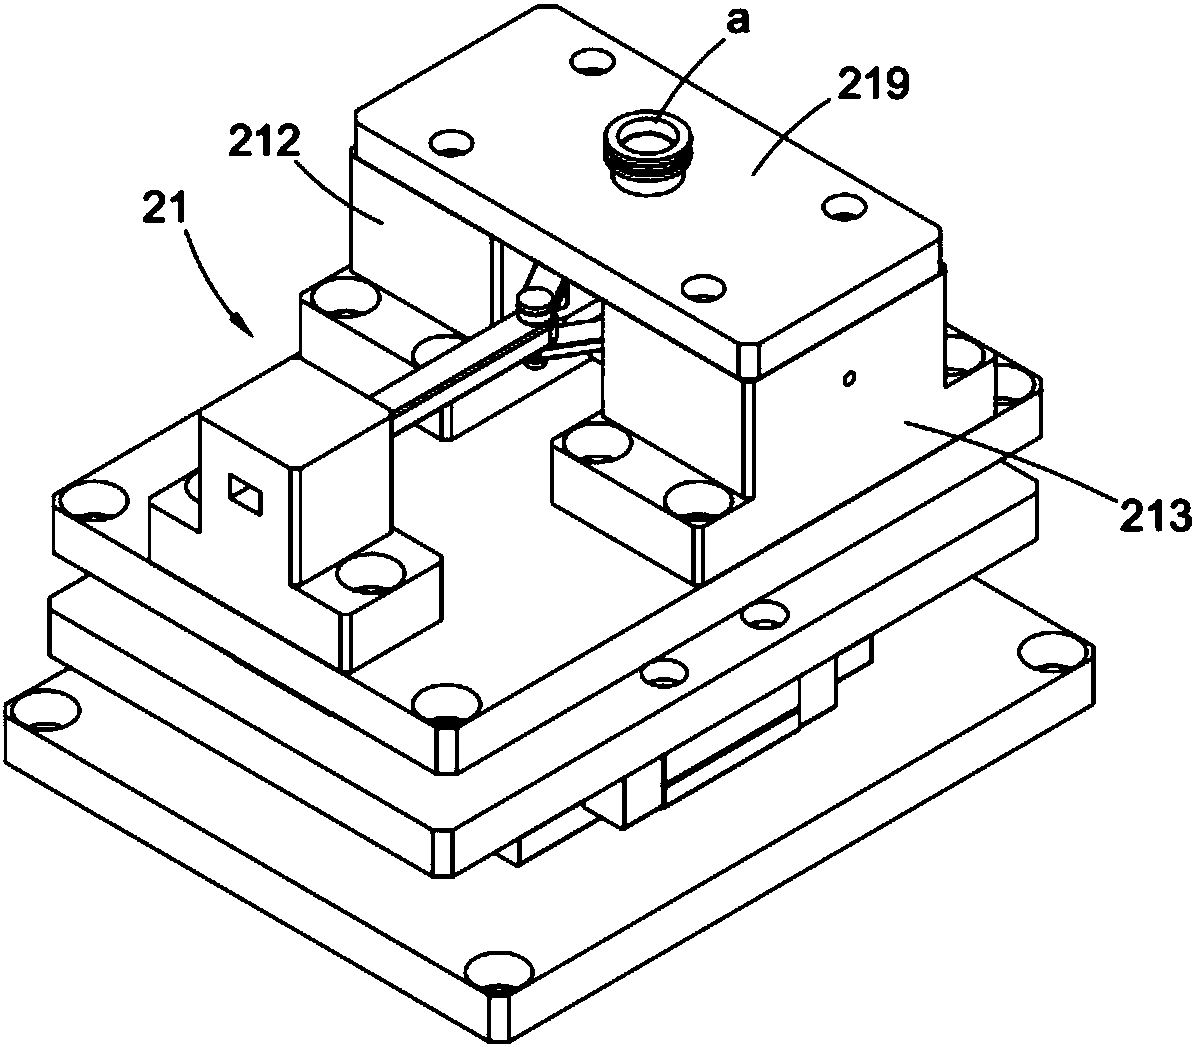 A sealing ring assembly device